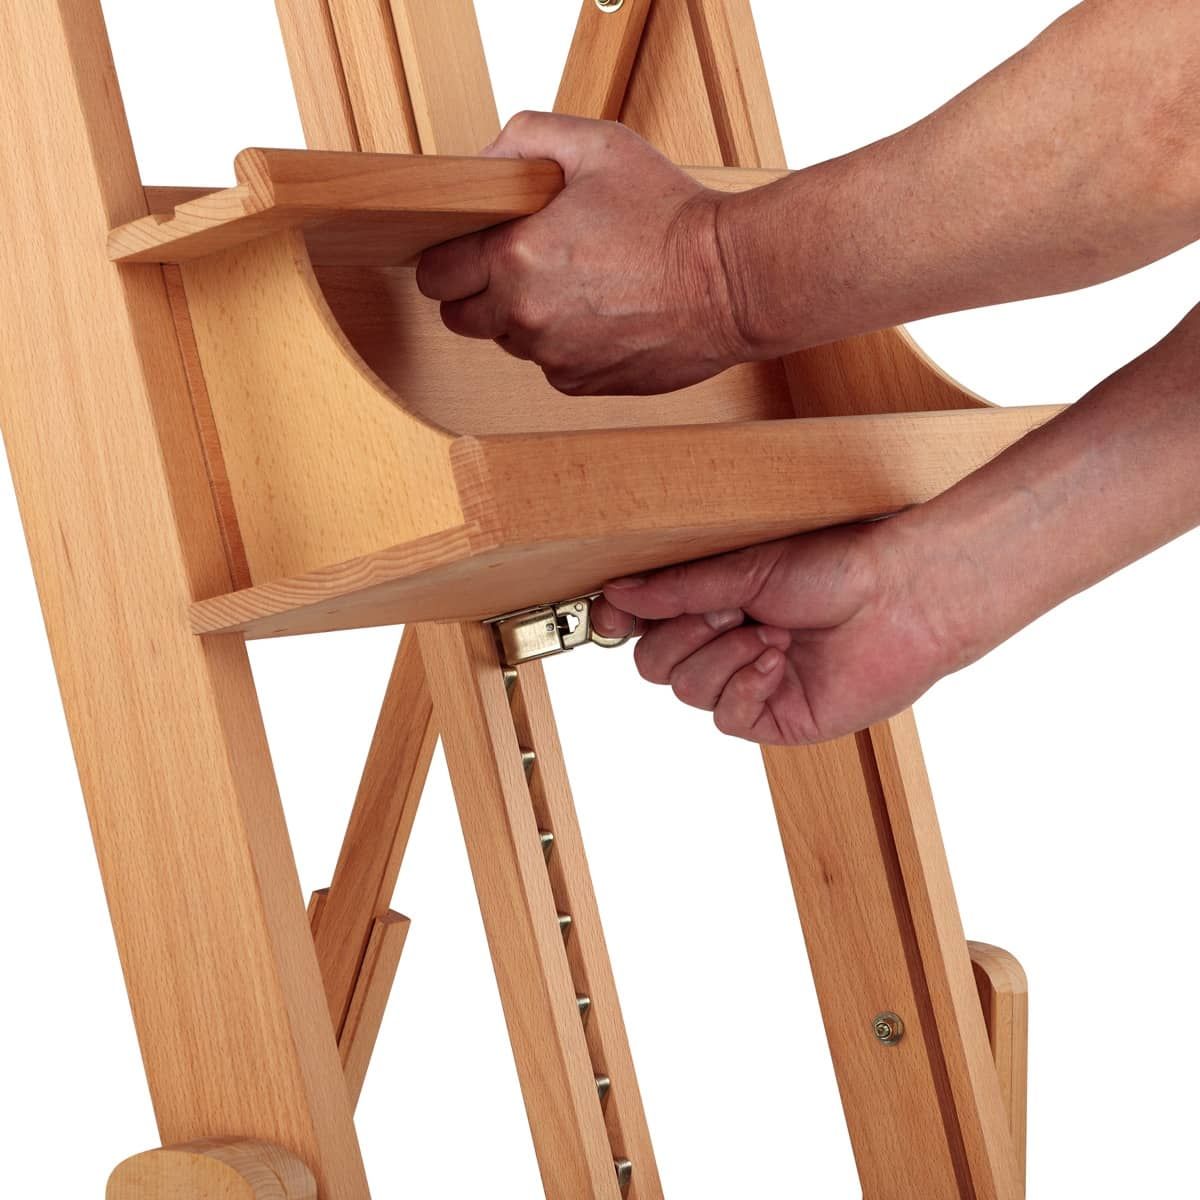 Meeden Large Painters Easel of Max Height 89'', Hold Canvas up to 48',  Adjustable Solid Beech Tripod Wood Artist Easel, Studio a-Frame Art Easel  for Painting - China Easel for Painting, Art